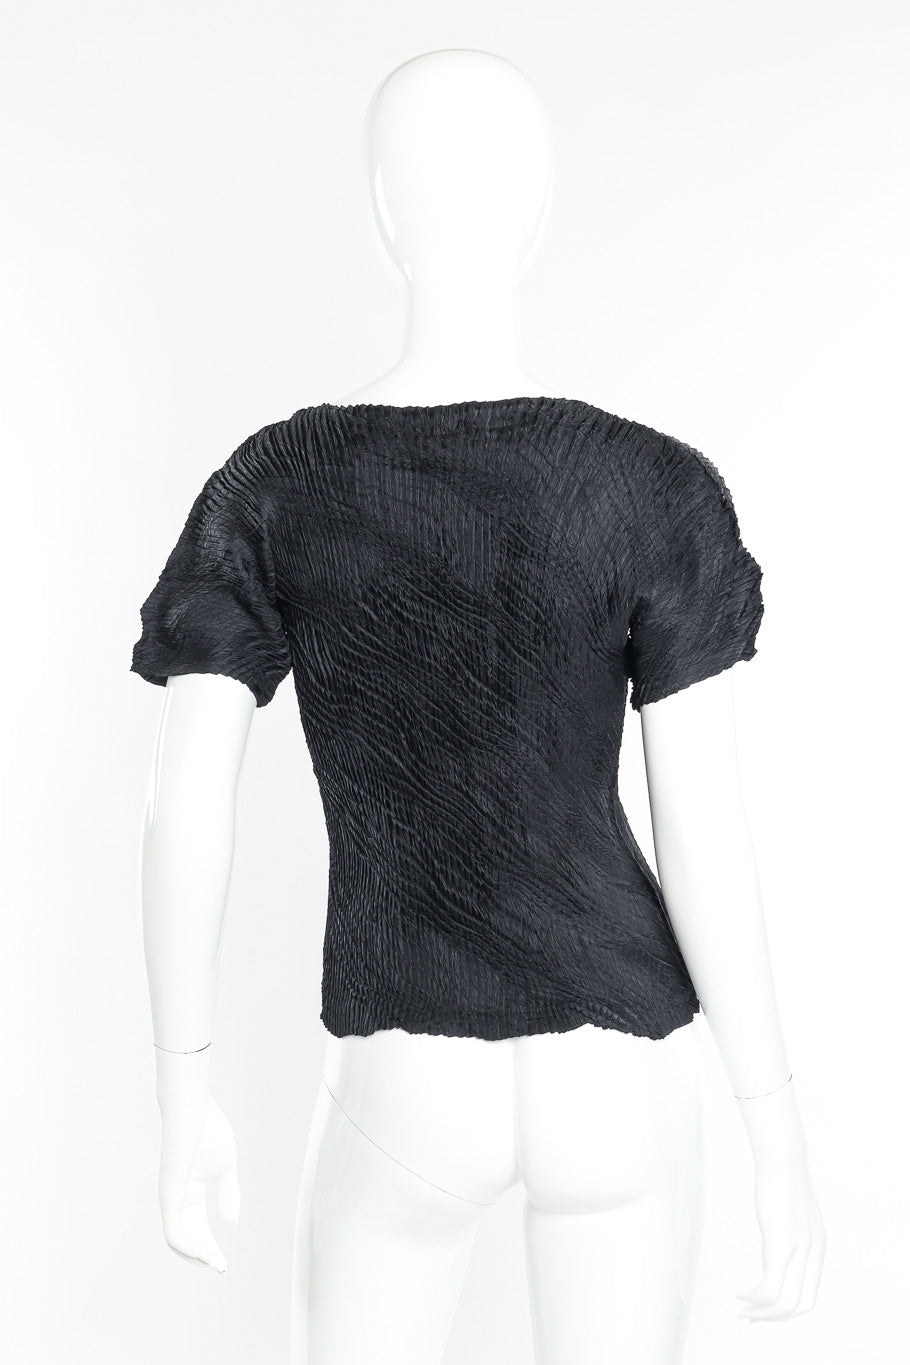 Issey Miyake Wave Ruche Top back view on mannequin @Recessla